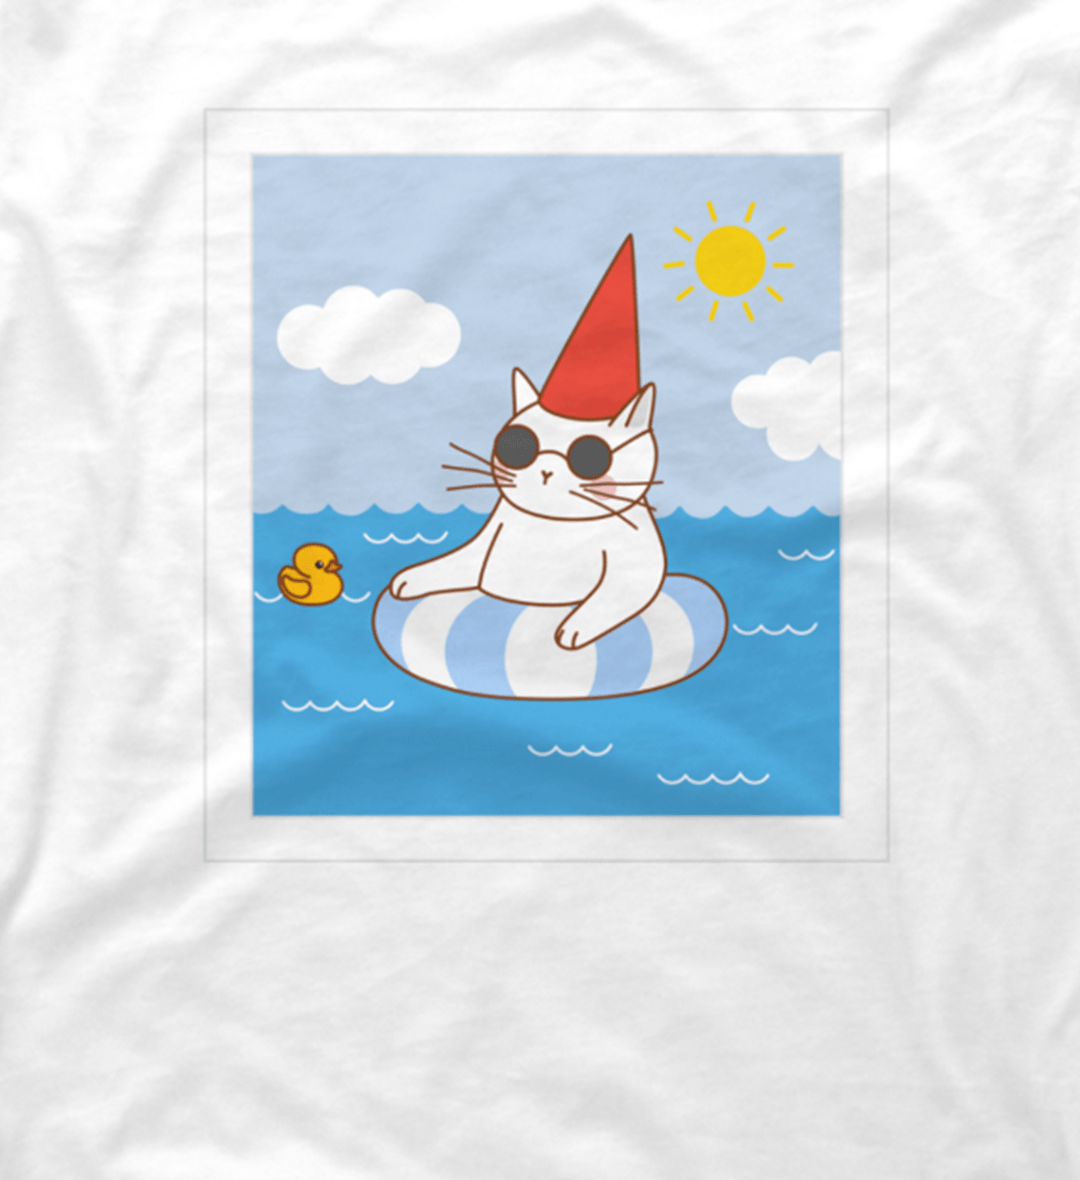 White Cat’s postcards: relax on the waves